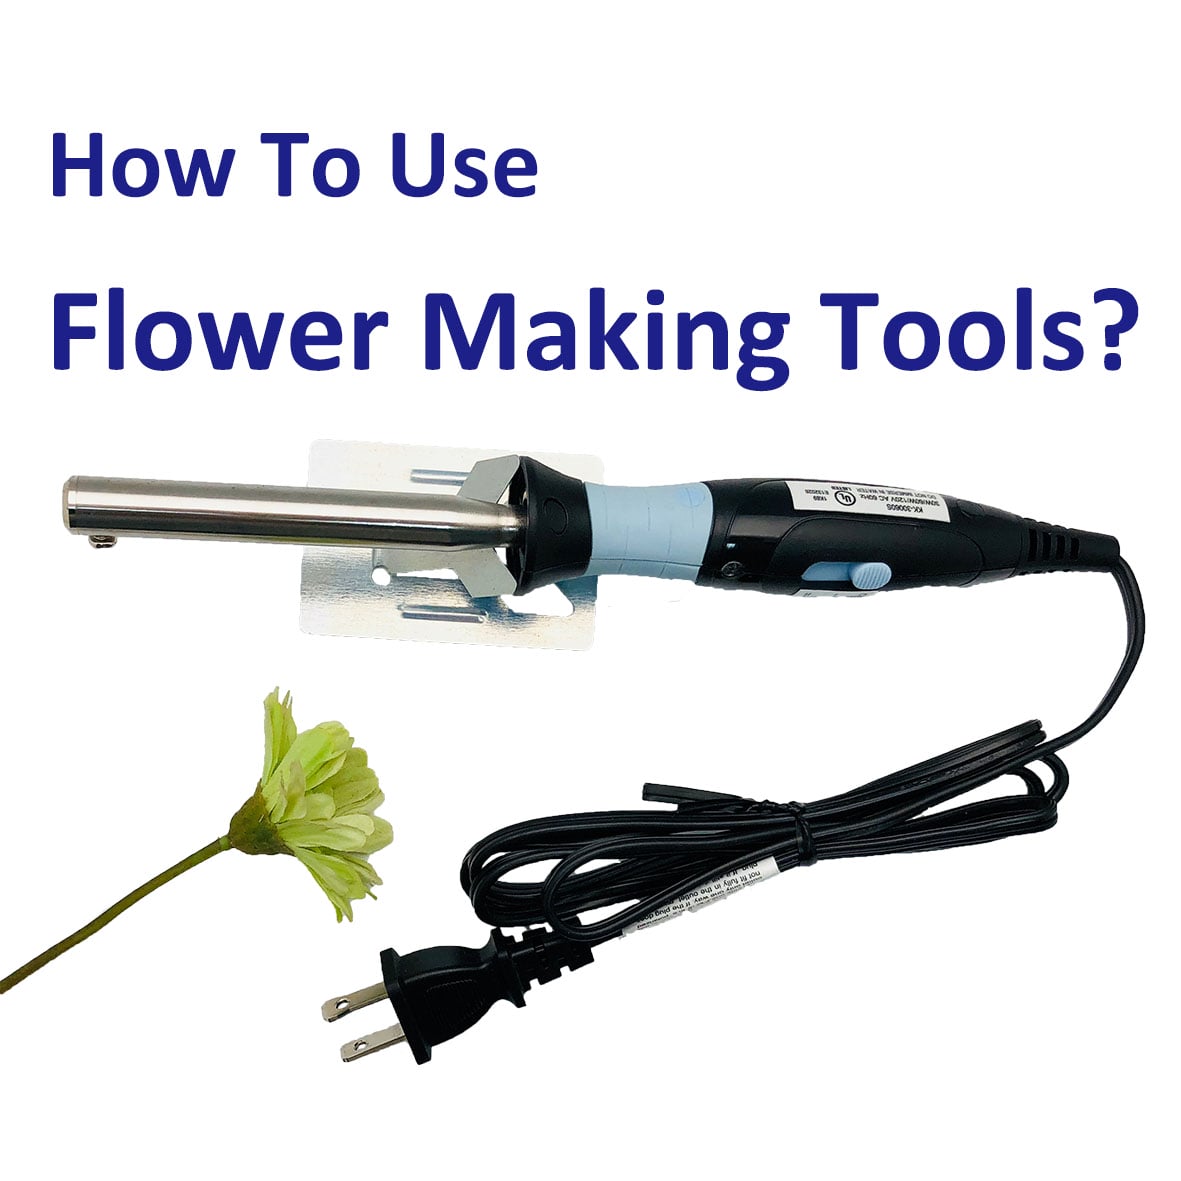 How to use flower making tools